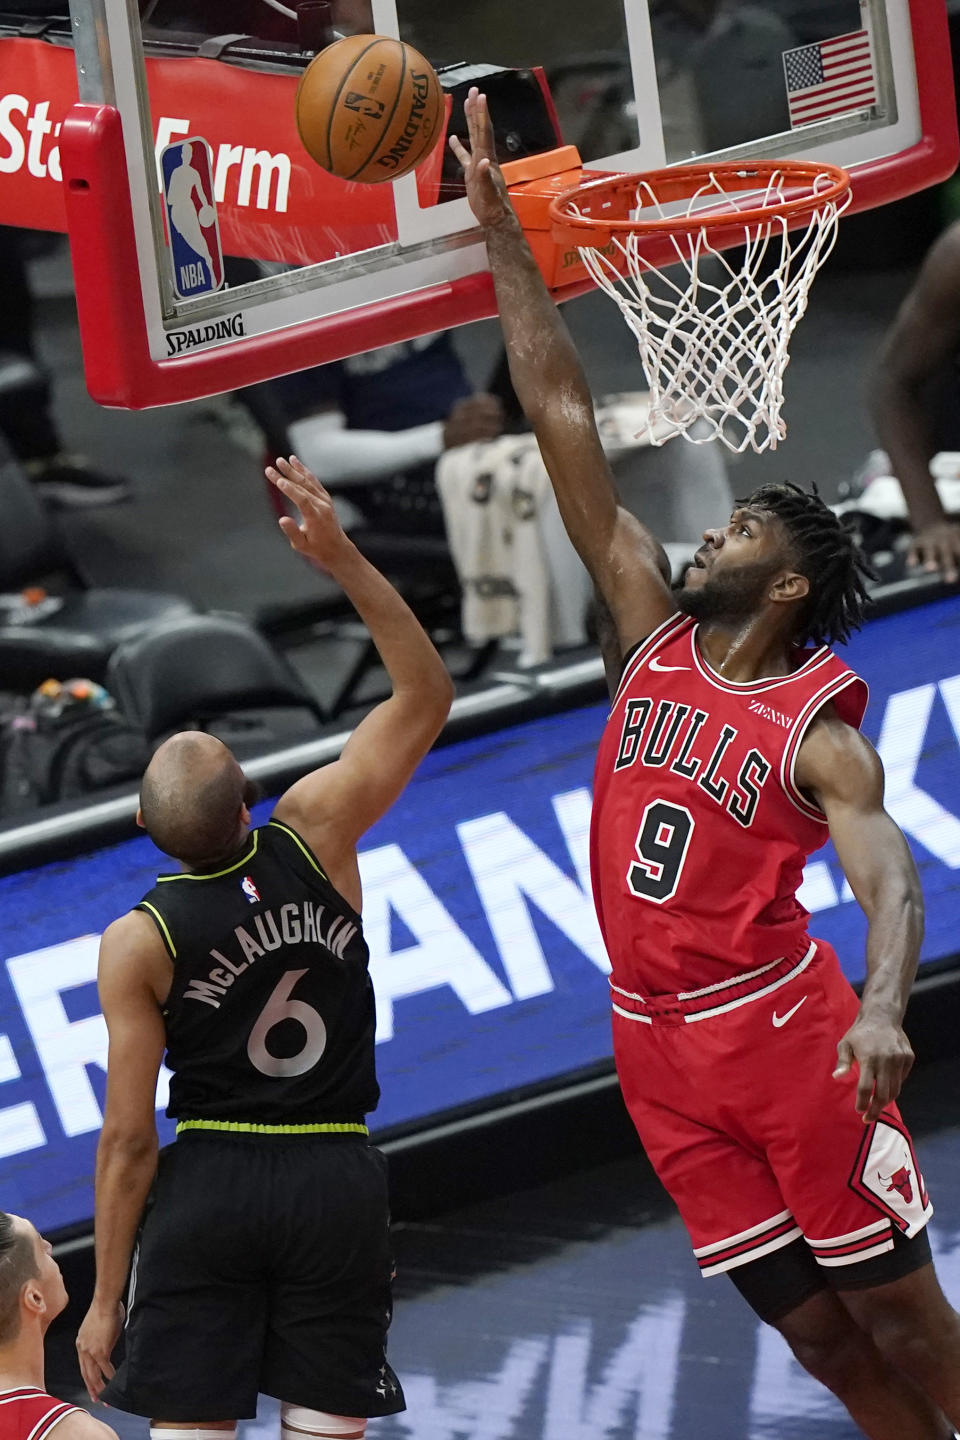 Chicago Bulls forward Patrick Williams, right, blocks a shot by Minnesota Timberwolves guard Jordan McLaughlin during the first half of an NBA basketball game in Chicago, Wednesday, Feb. 24, 2021. (AP Photo/Nam Y. Huh)